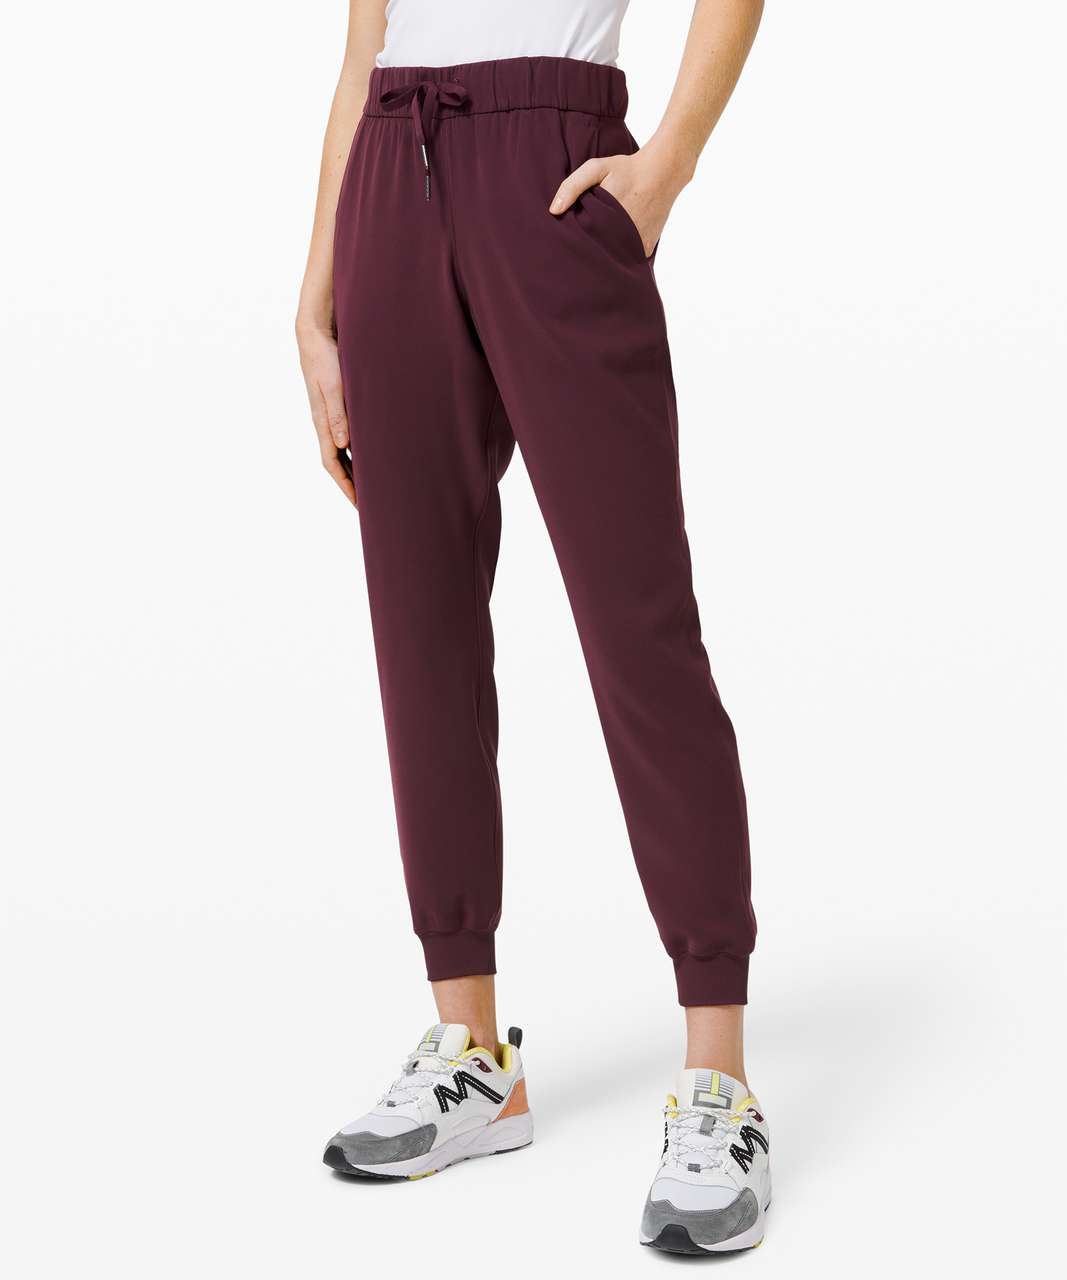 Lululemon On the Fly Jogger *Woven - Cassis